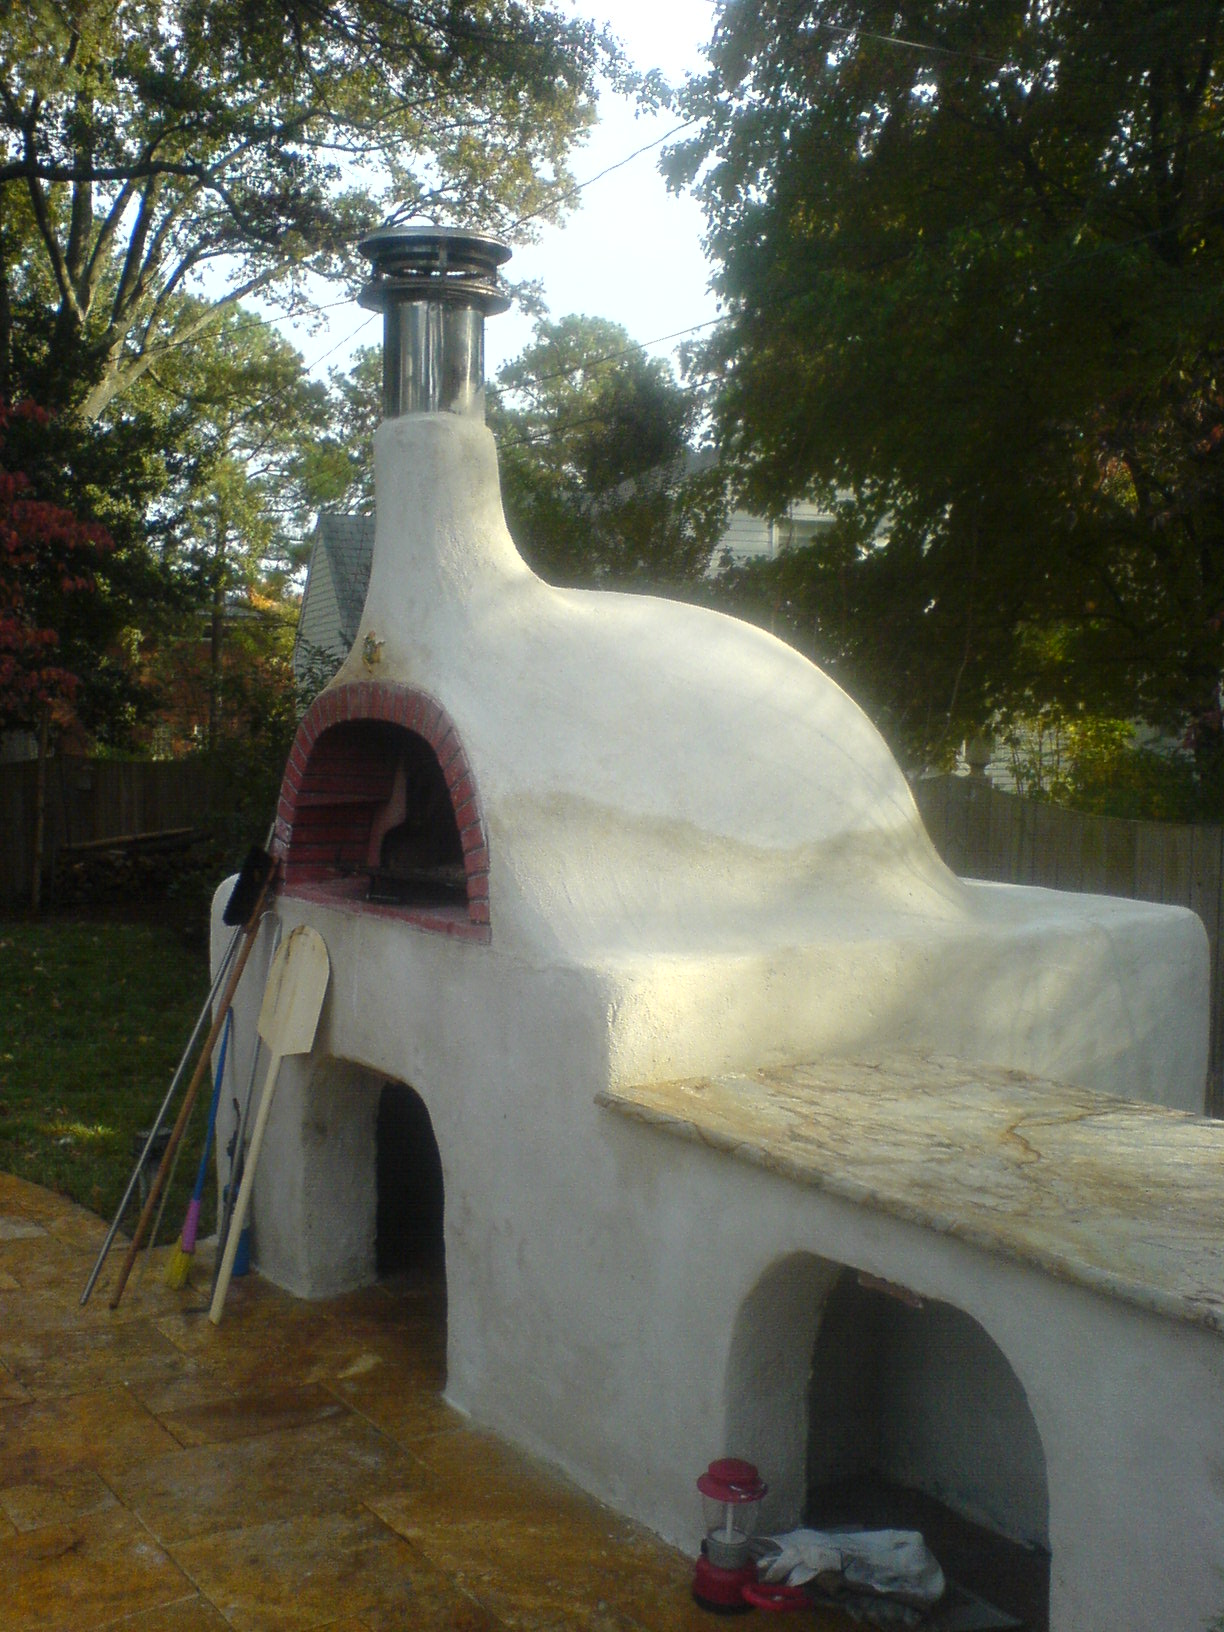 Pizza Oven Cover